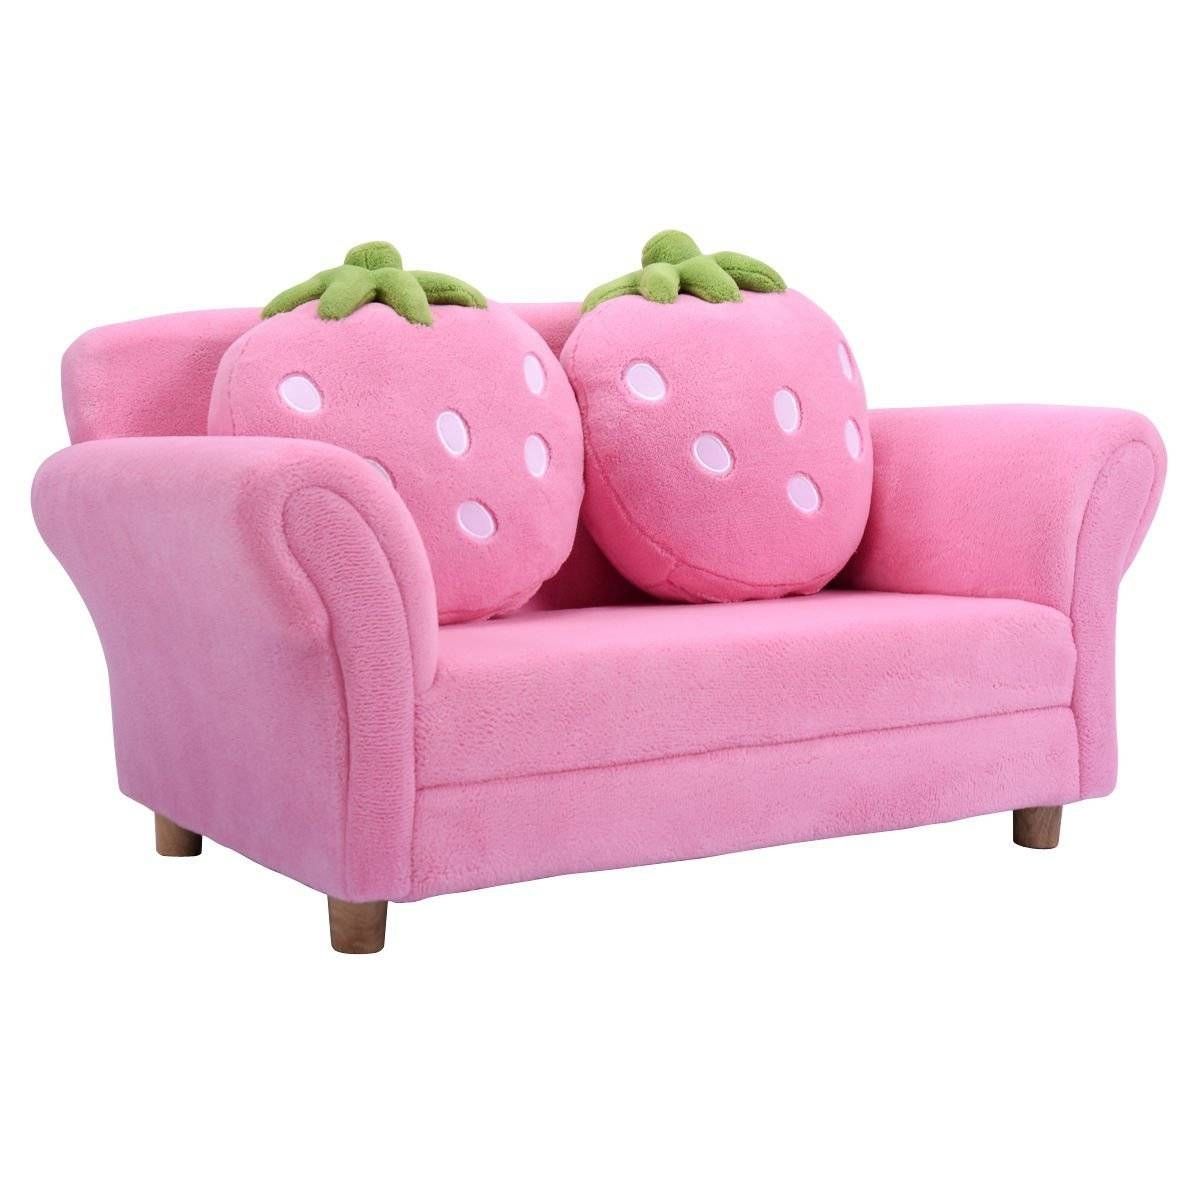 Sofas Center : Sofa Chair For Toddlers Toddler Kolino And Baby L Within Toddler Sofa Chairs (Photo 8 of 15)